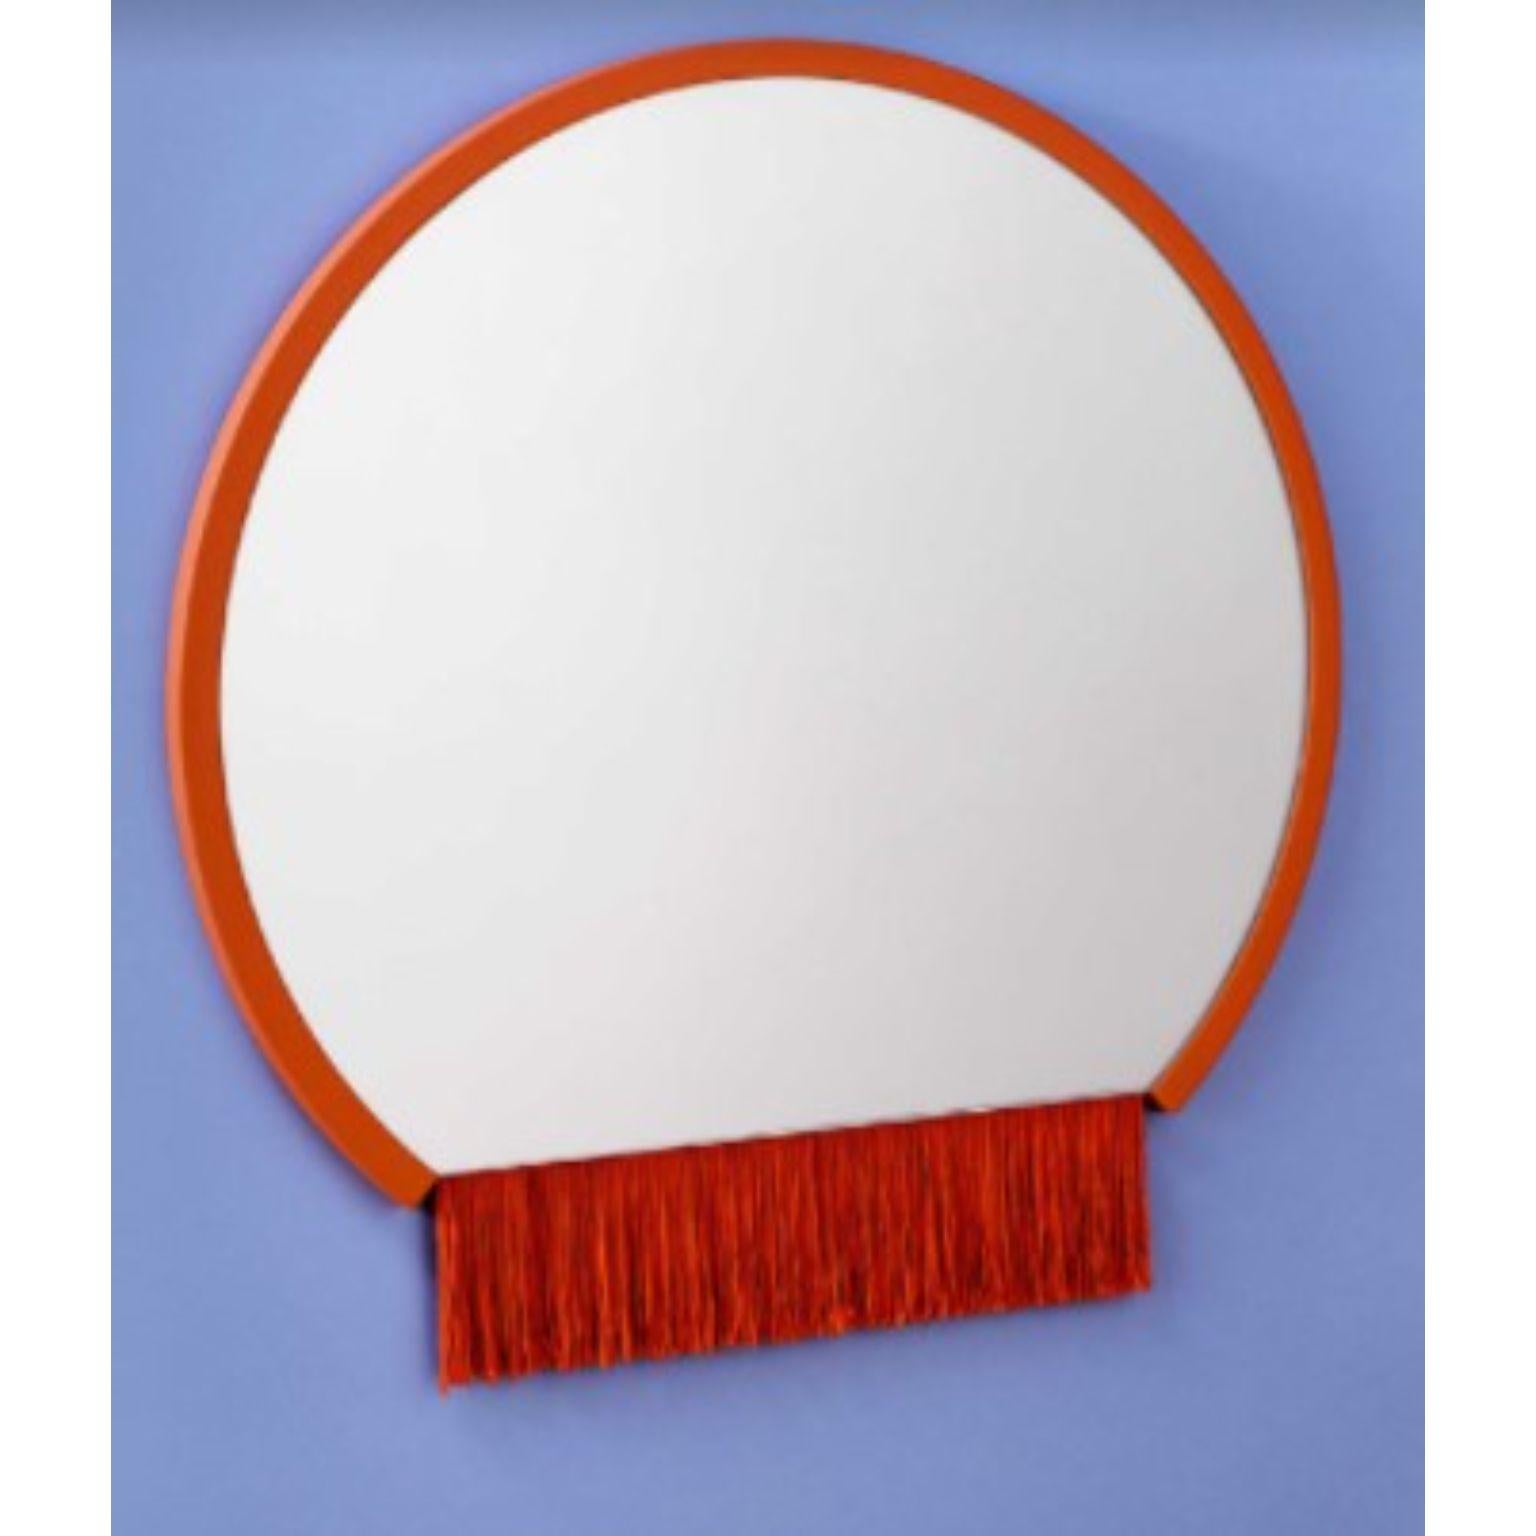 Boudoir large wall mirror by Tero Kuitunen.
Material: glass mirror, mdf board, textile fringes.
Dimensions: D 68 x W 68 x H 1.6 cm
Also available : different size, models and colors. 

Playful wall mirrors with fringe detail.

Designer Tero